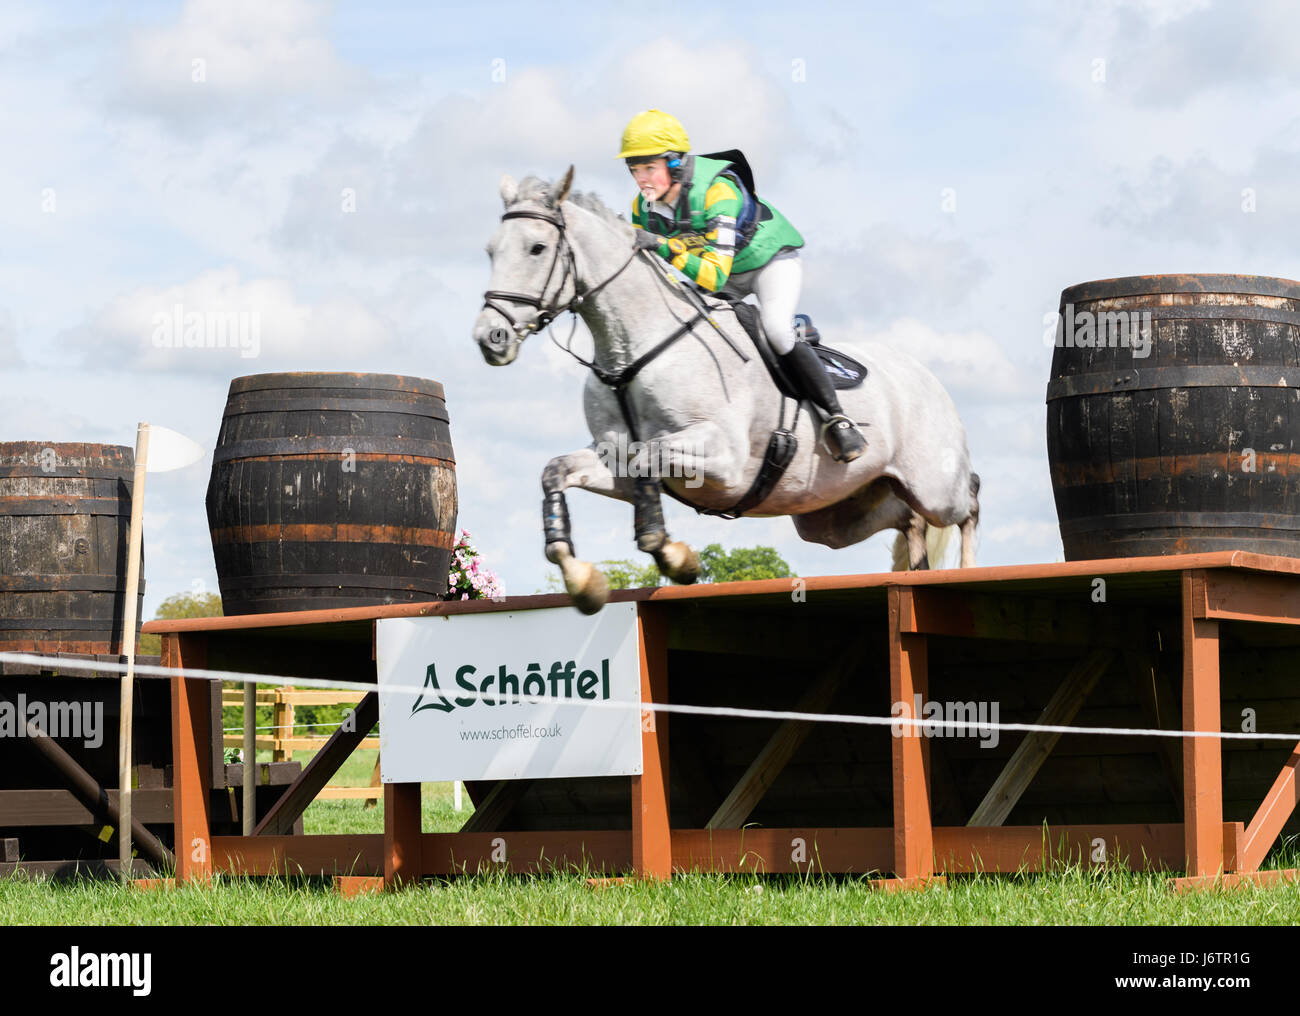 Rockingham Castle, Corby, UK. 21st May, 2017. Holly Needham and her horse Strike a Pose clear the final obstacle on a sunny day during the cross country phase of the Rockingham International Horse Trials in the grounds of the Norman castle at Rockingham, Corby, England on 21st May 2017. Credit: miscellany/Alamy Live News Stock Photo